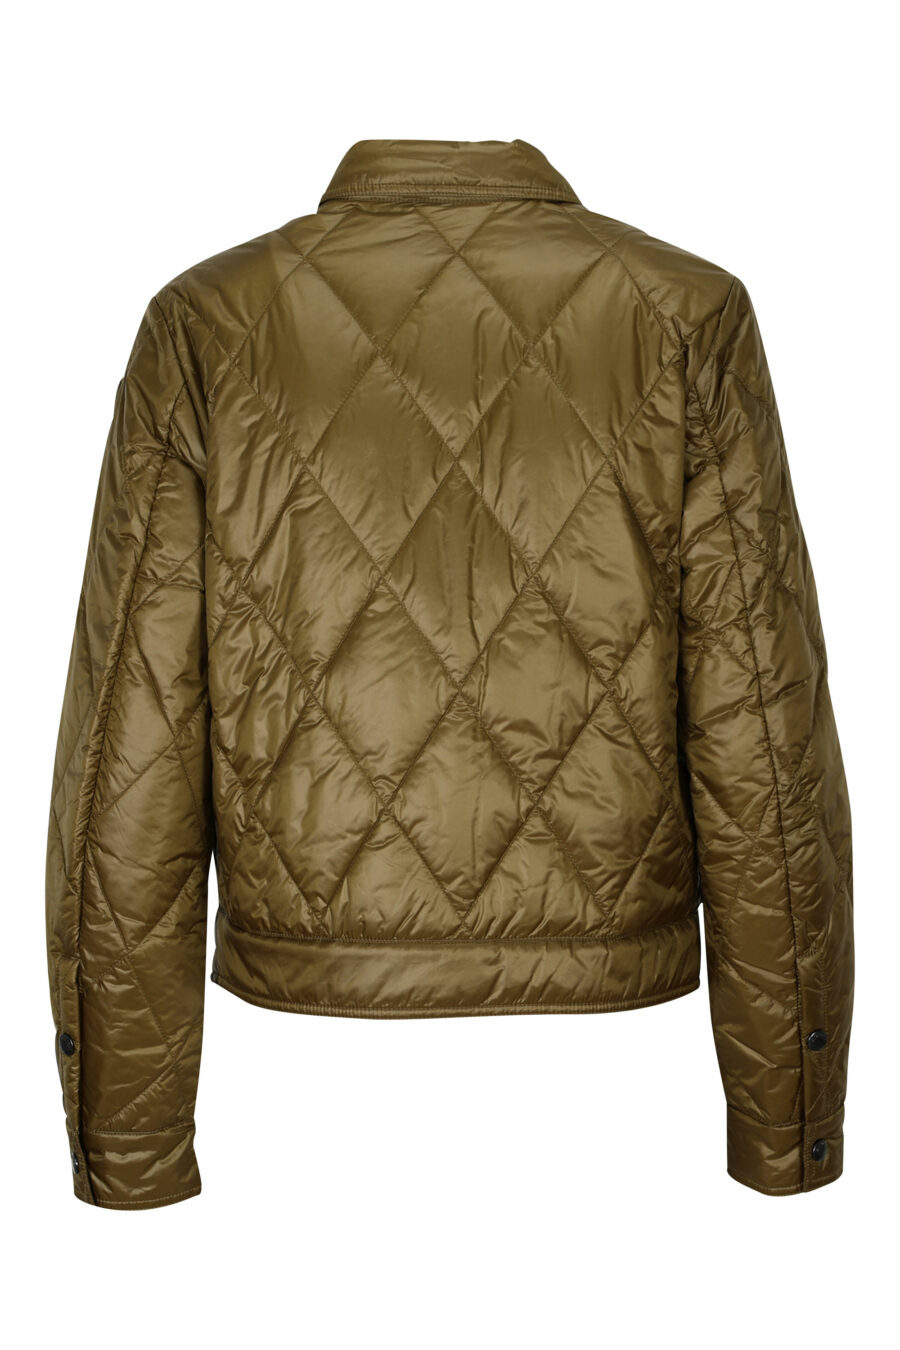 Green jacket with wavy lines and logo side patch - 8058610709860 3